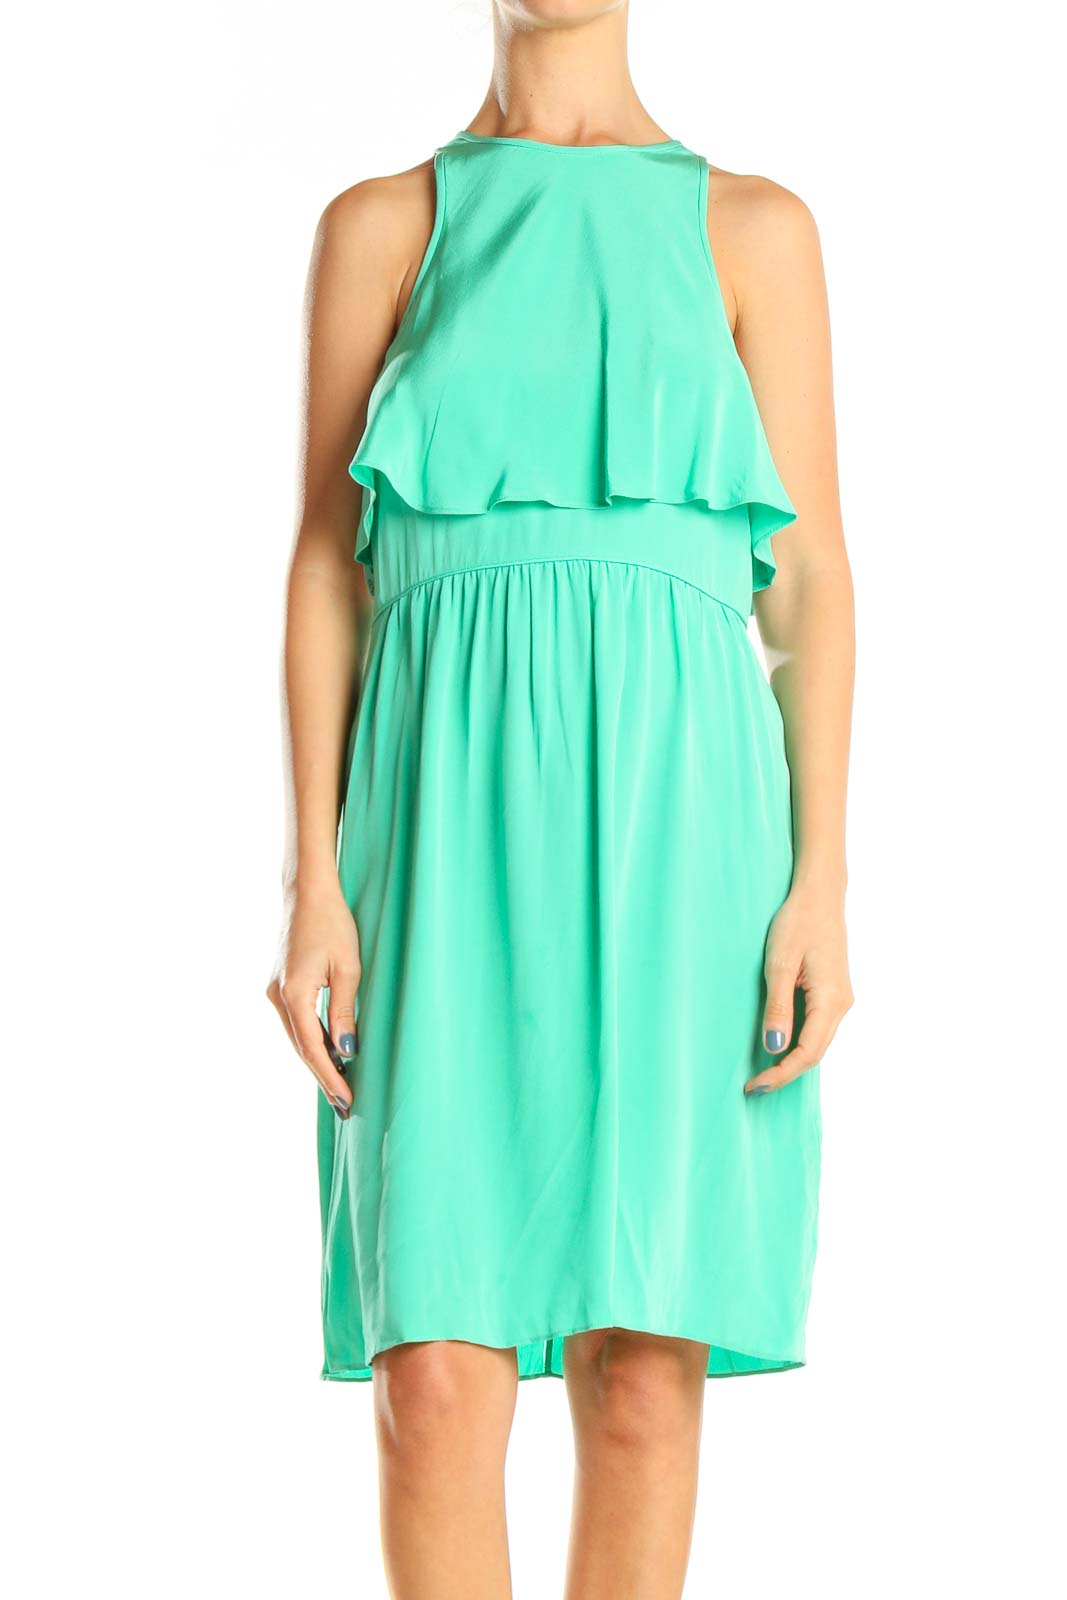 Green Retro High Neck Fit & Flare Dress Front